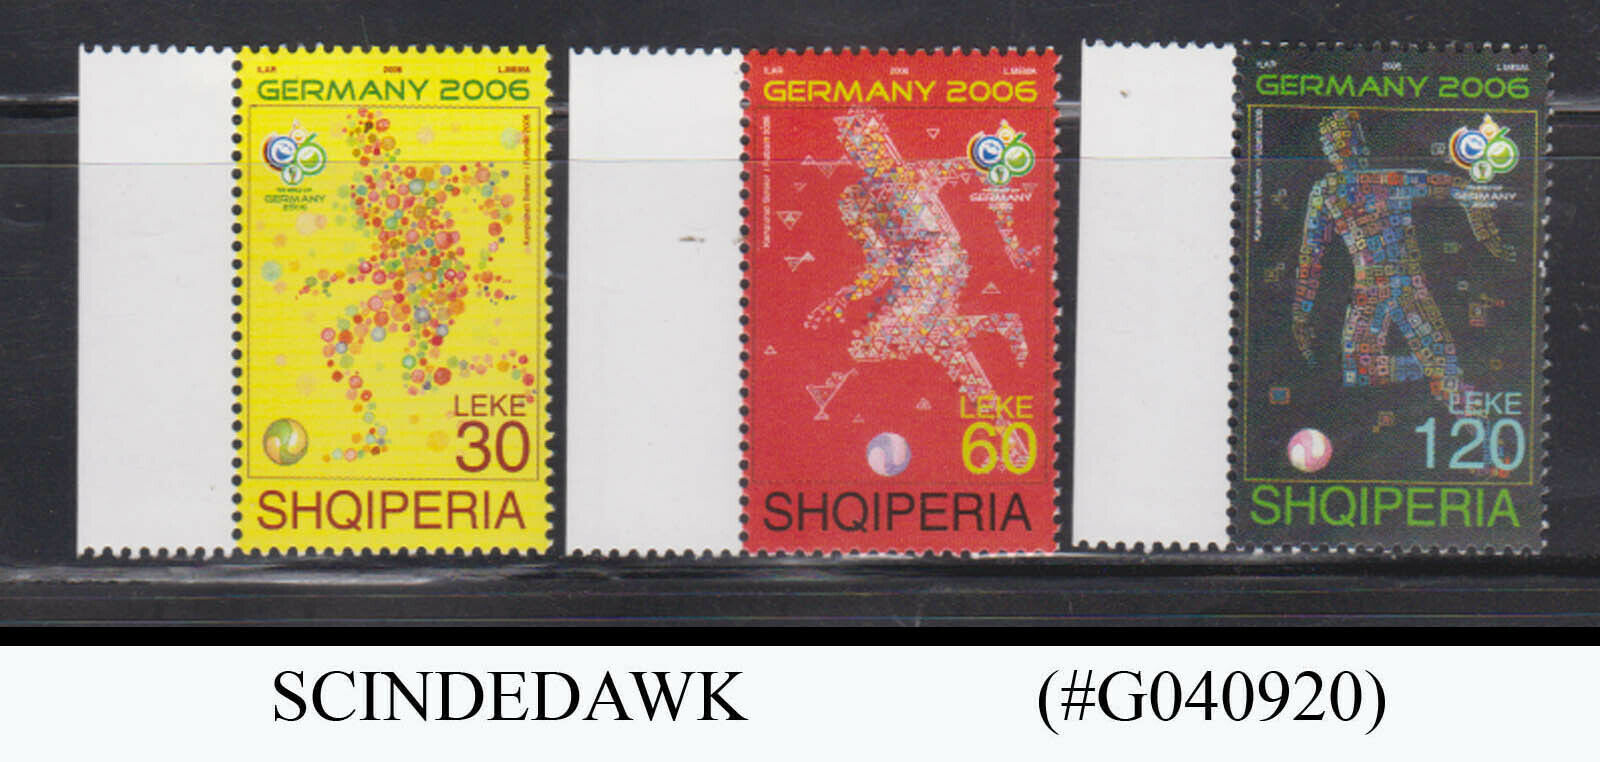 ALBANIA - 2006 WORLD FOOTBALL CHAMPIONSHIP CUP/SPORTS IN GERMANY 3V MNH